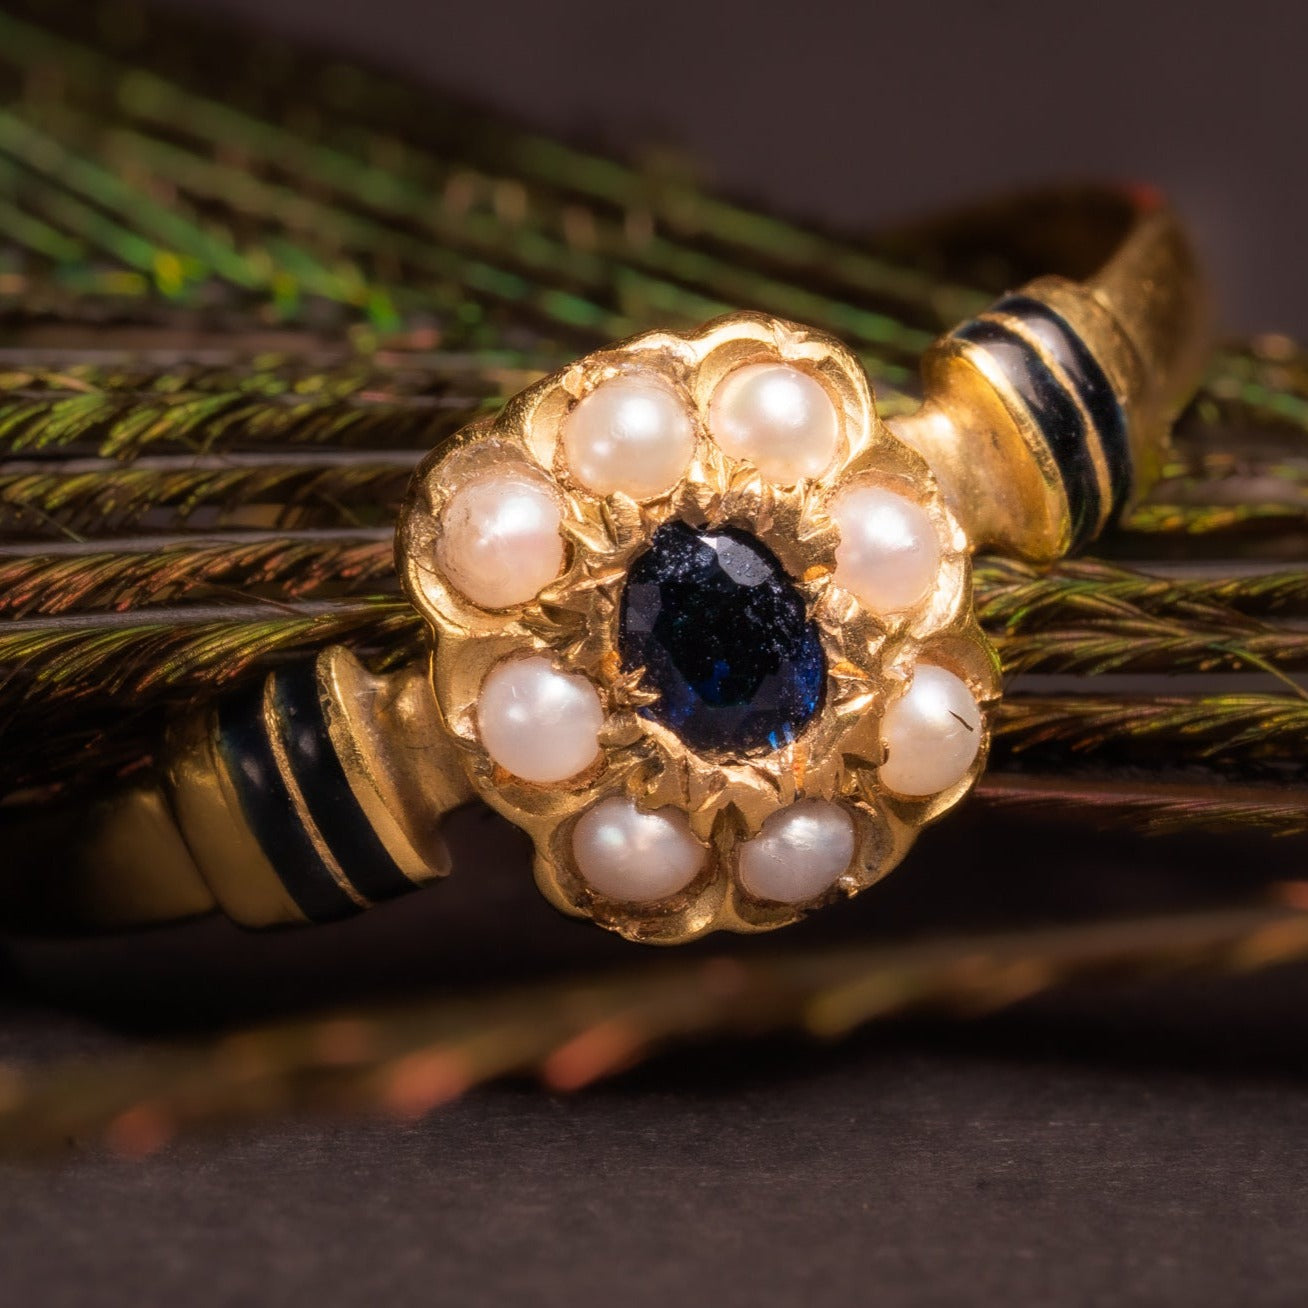 Such a striking and feminine sapphire gold ring! This marvelous antique Victorian ring is made of solid 18ct yellow gold.  The crown carries a natural sapphire, pearls and is accented with black enamel. Current size 7.75 - adjustable.